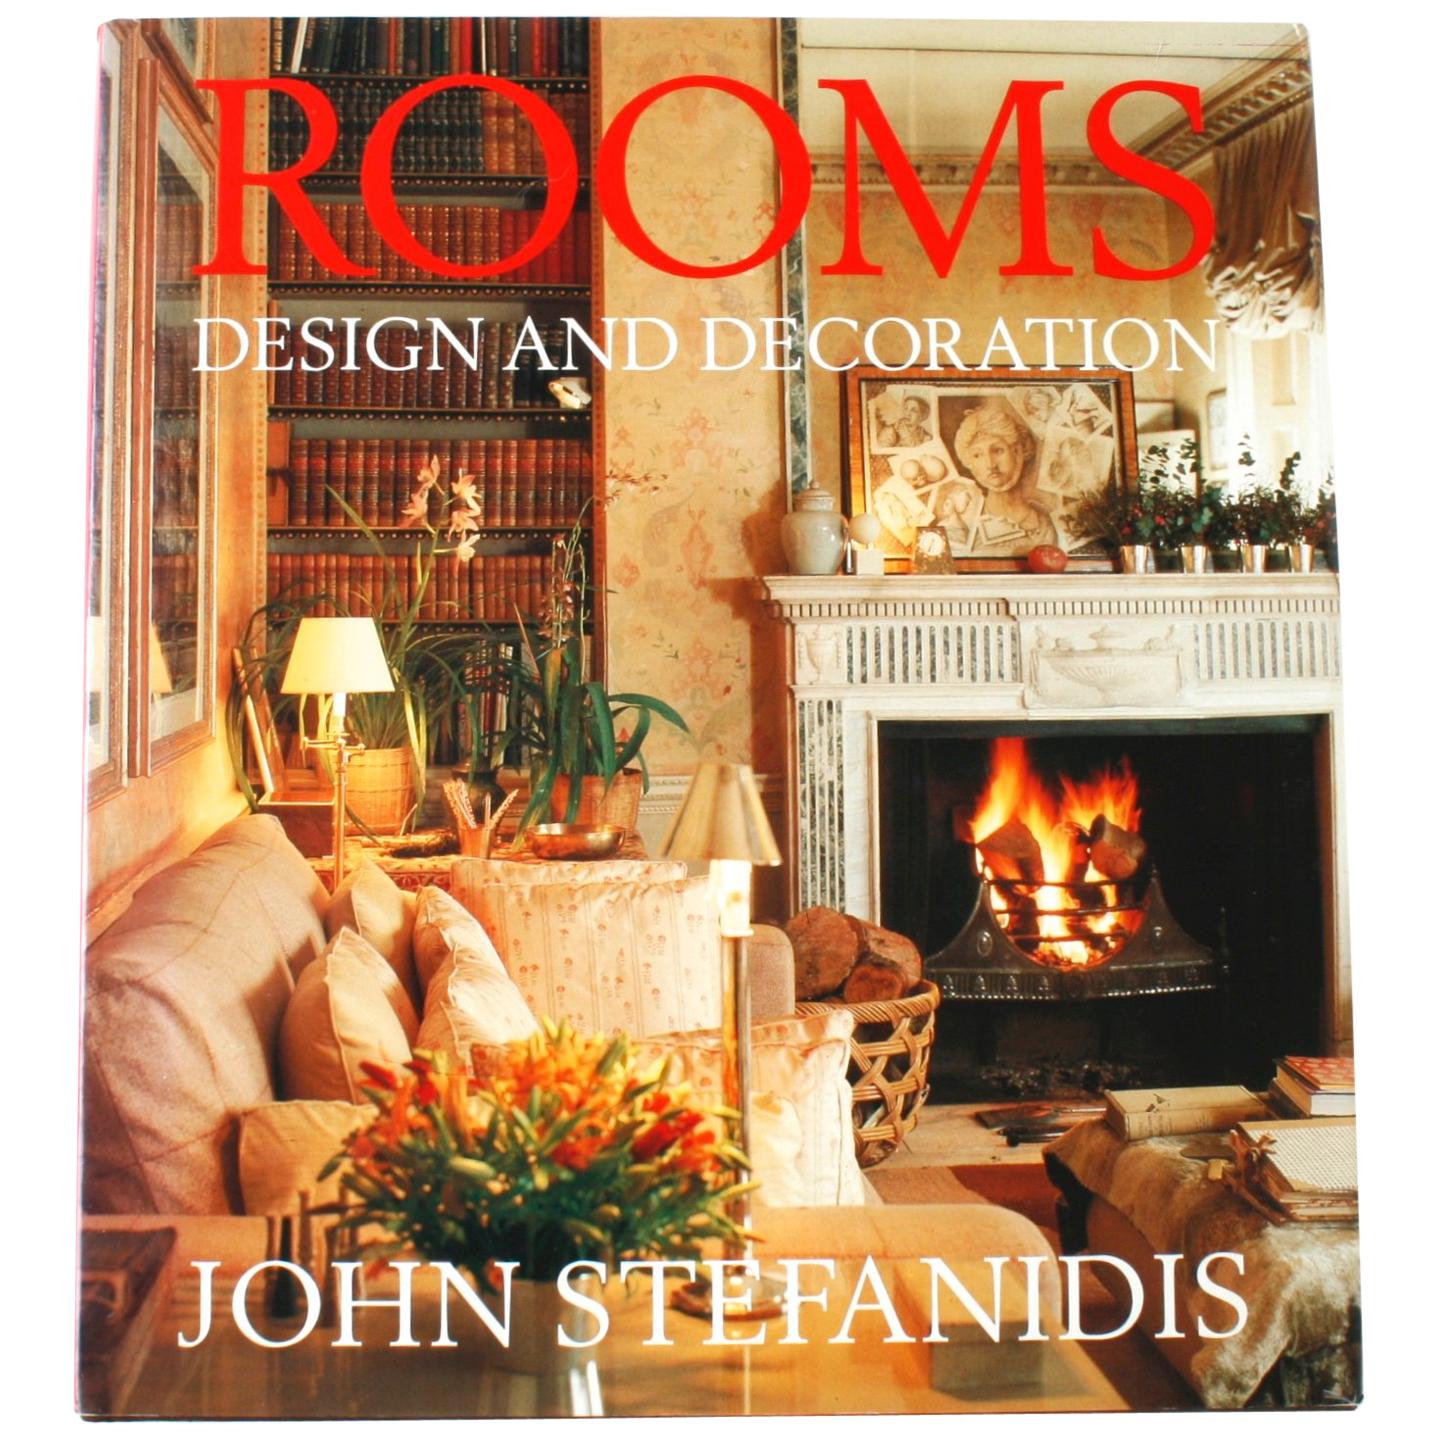 Rooms: Design and Decoration Signed First Edition by John Stefanidis